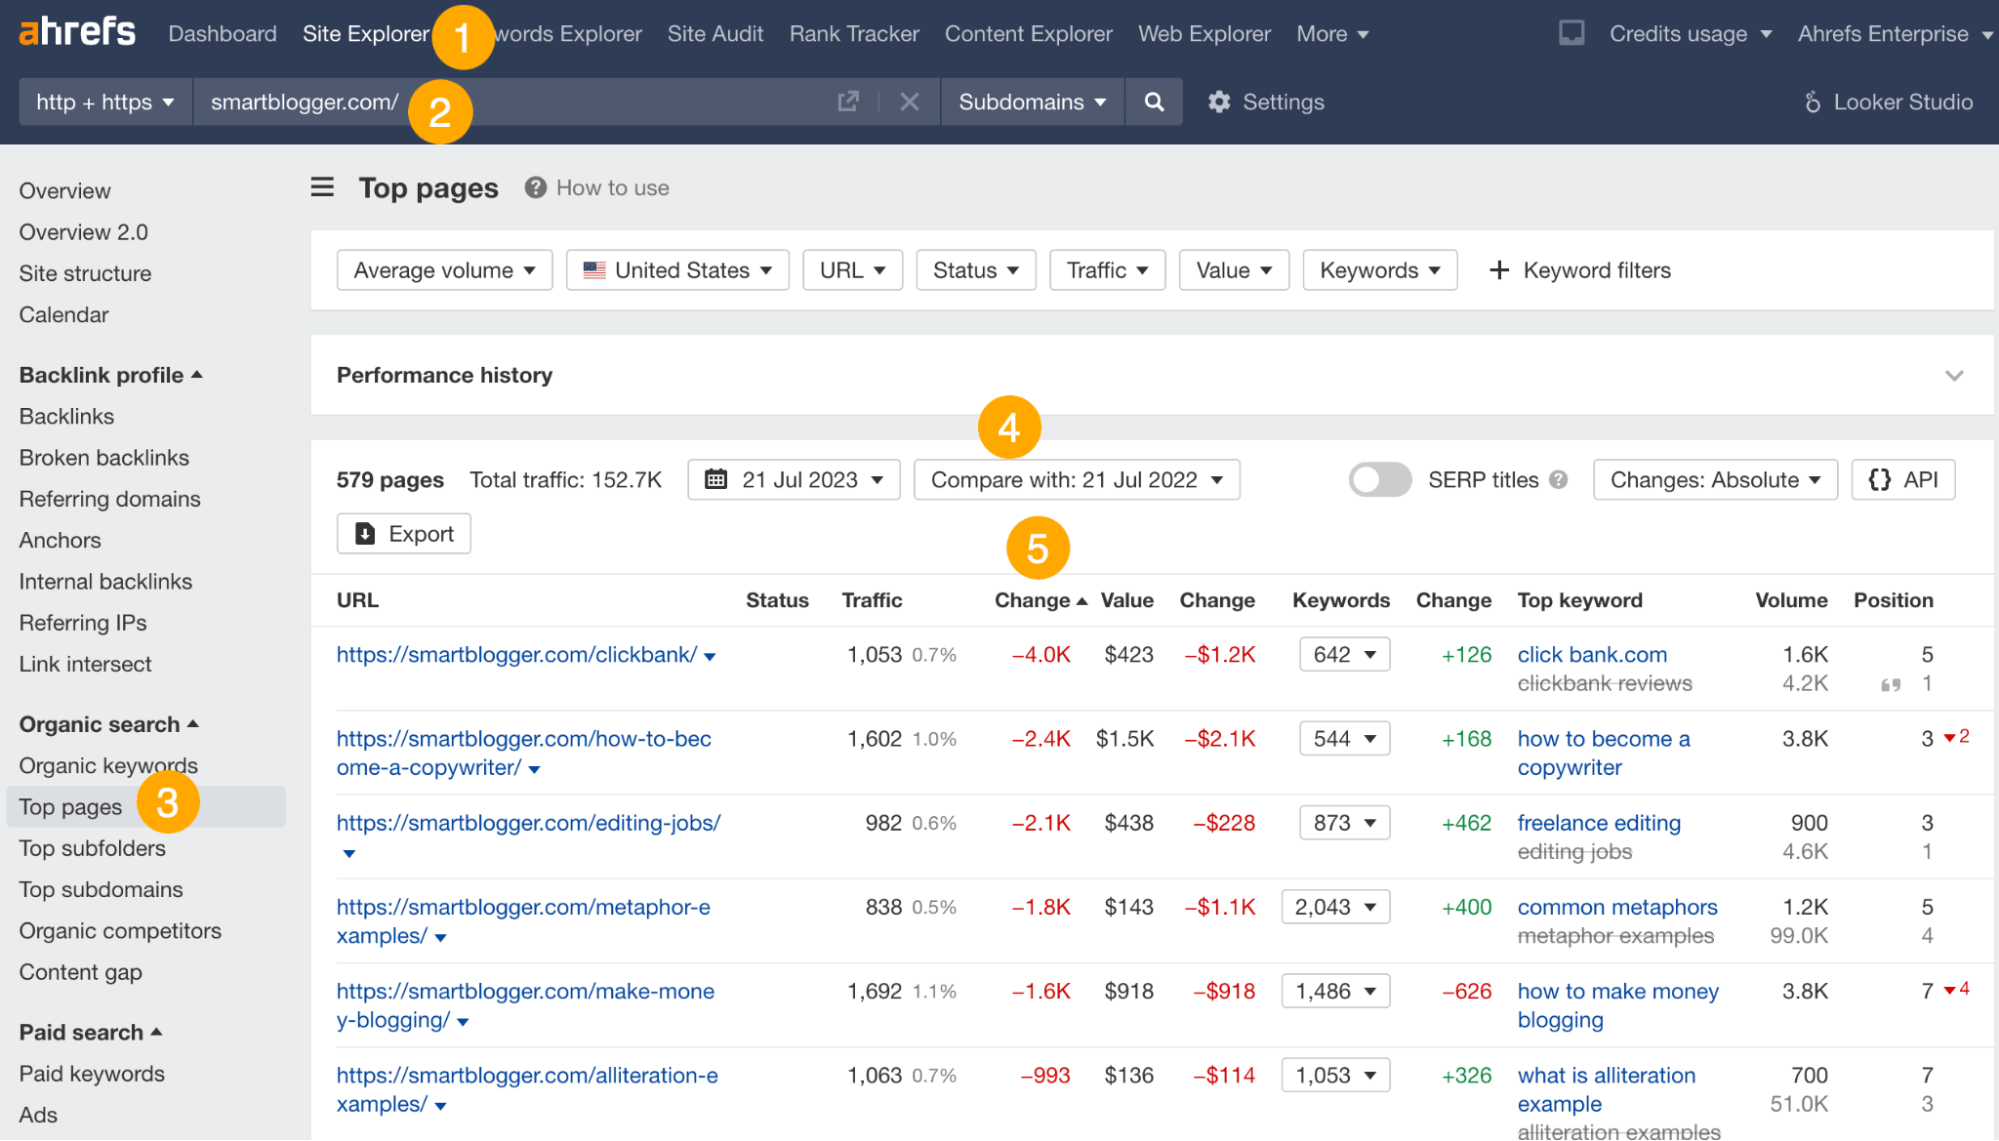 Using Ahrefs' Site Explorer to find declines in traffic for your target blog so you can pitch it an update
